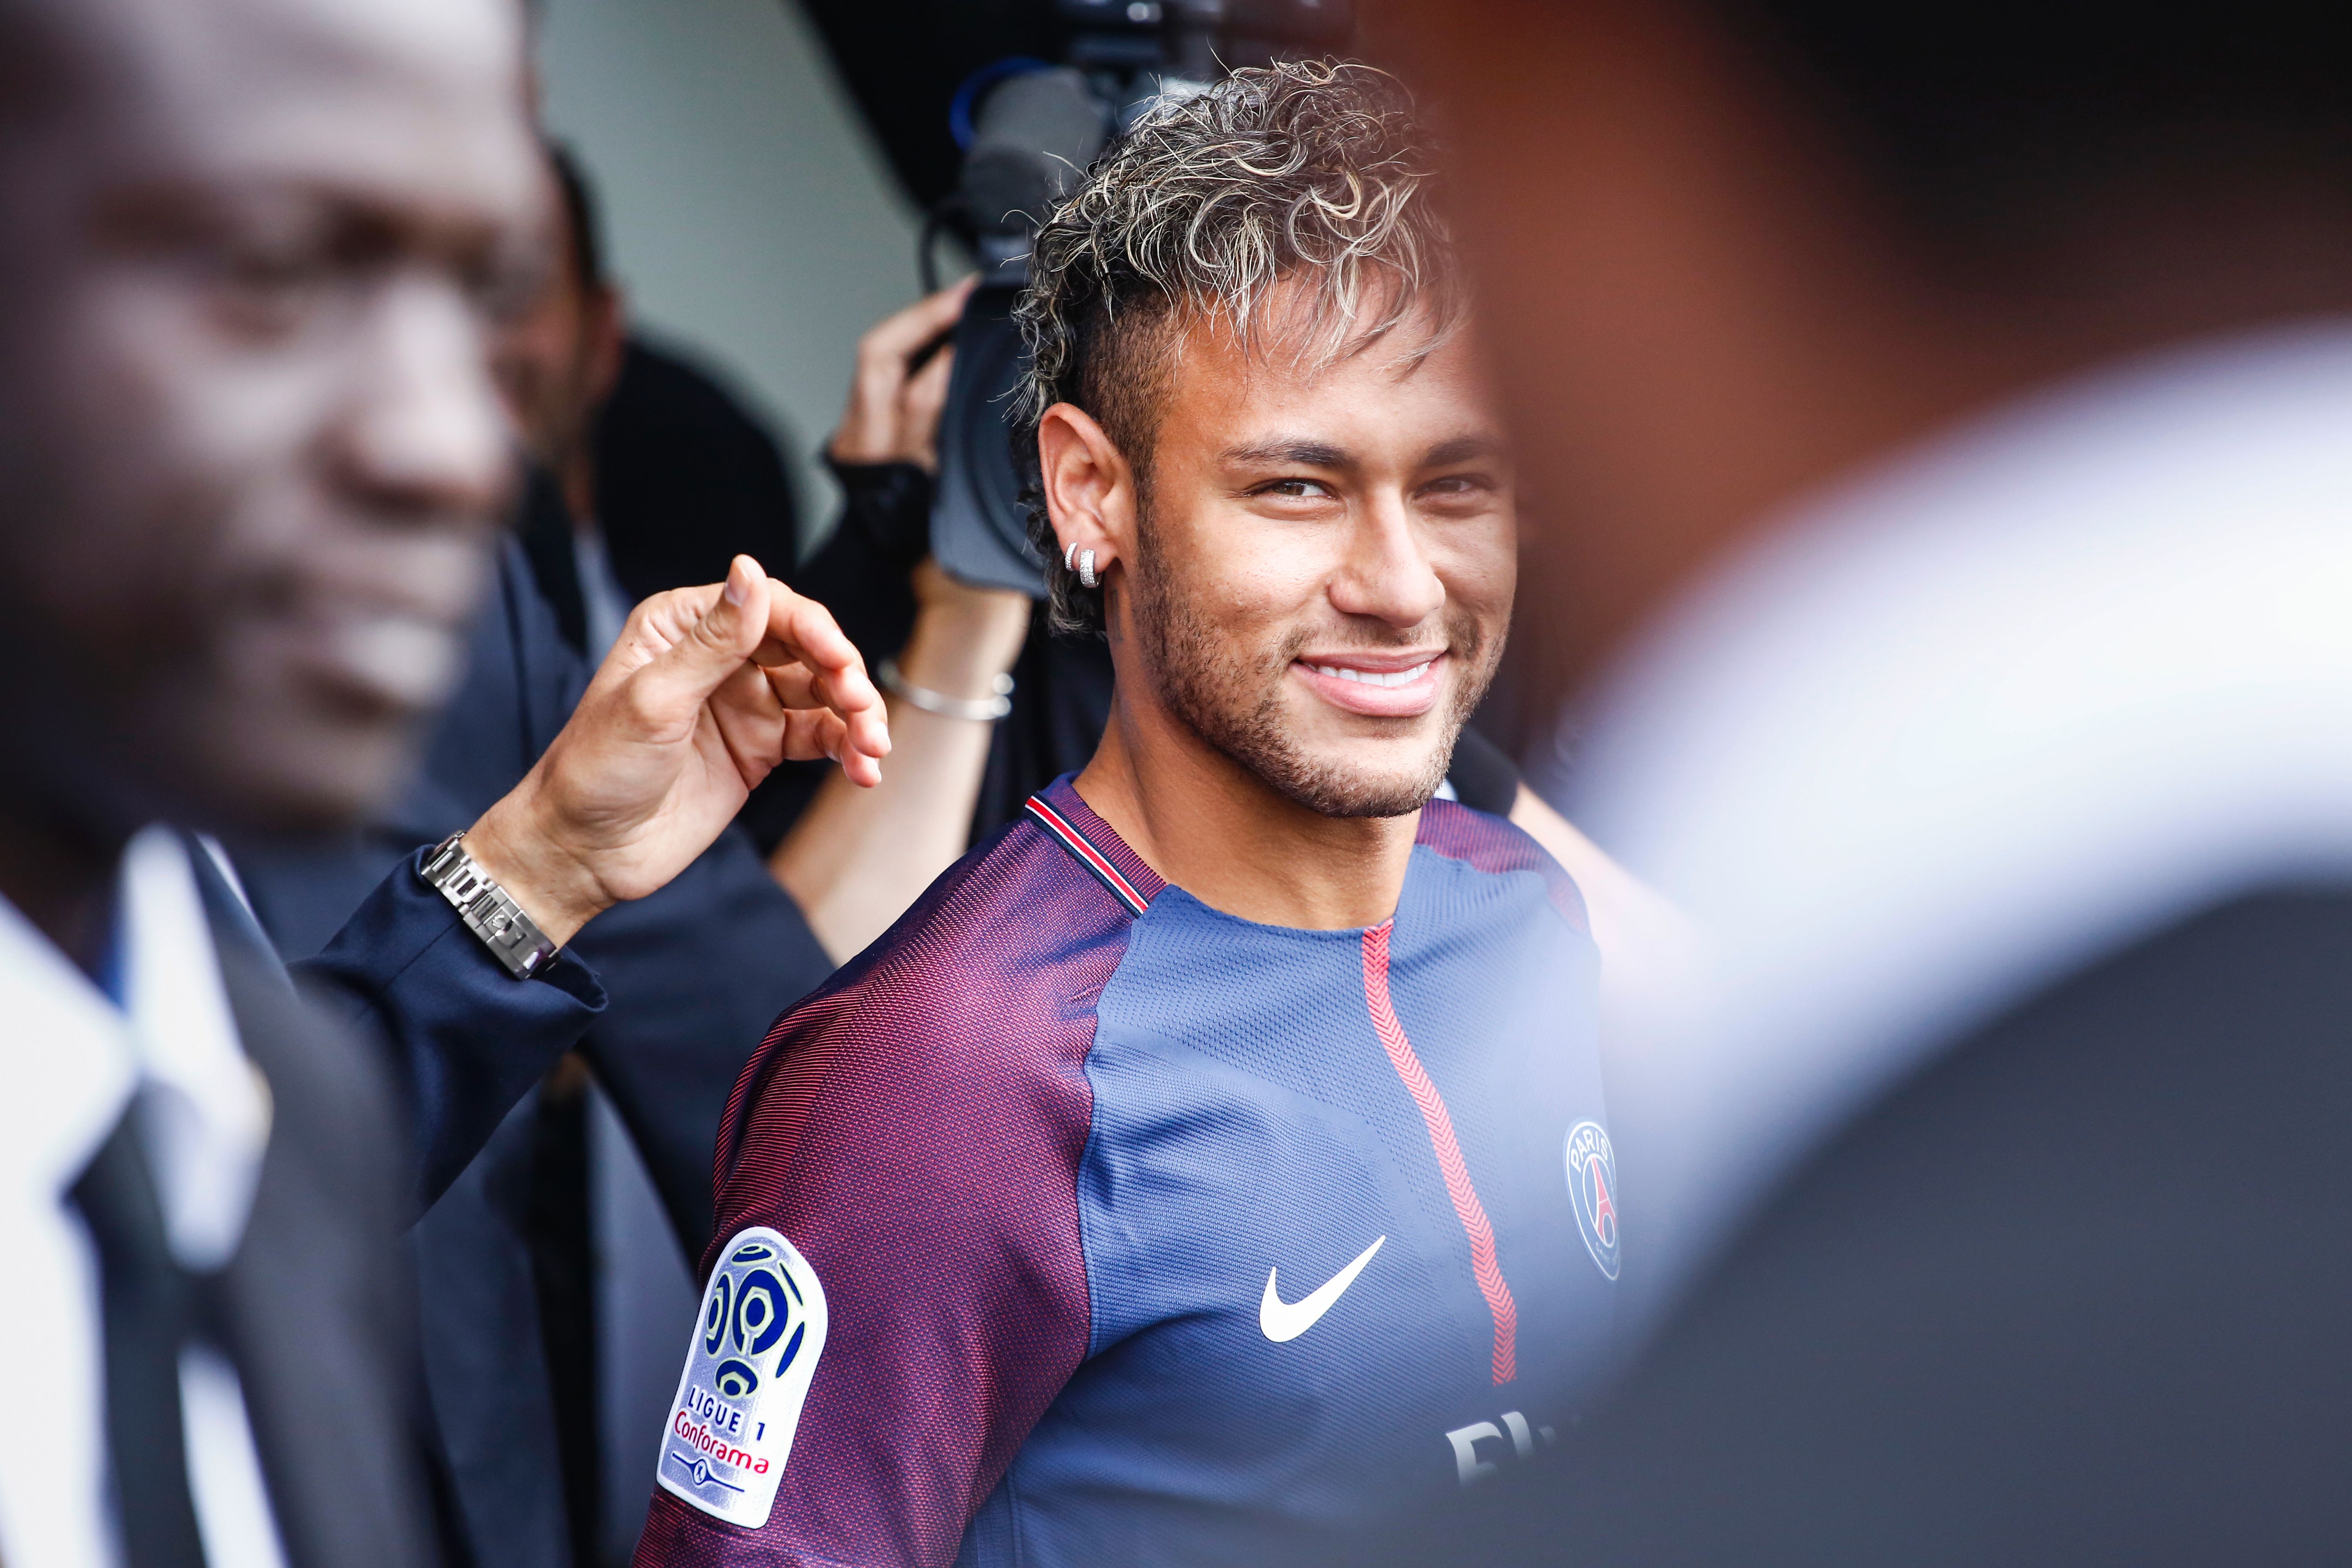 Brazilian superstar Neymar arrives to greet supporters during his official presentation at the Parc des Princes stadium on August 4, 2017 in Paris after agreeing a five-year contract following his world record 222 million euro ($260 million) transfer from Barcelona to Paris Saint Germain's (PSG).
Paris Saint-Germain have signed Brazilian forward Neymar from Barcelona for a world-record transfer fee of 222 million euros (around $264 million), more than doubling the previous record. Neymar said he came to Paris Saint-Germain for a "bigger challenge" in his first public comments since arriving in the French capital. / AFP PHOTO / Benjamin CREMEL        (Photo credit should read BENJAMIN CREMEL/AFP/Getty Images)